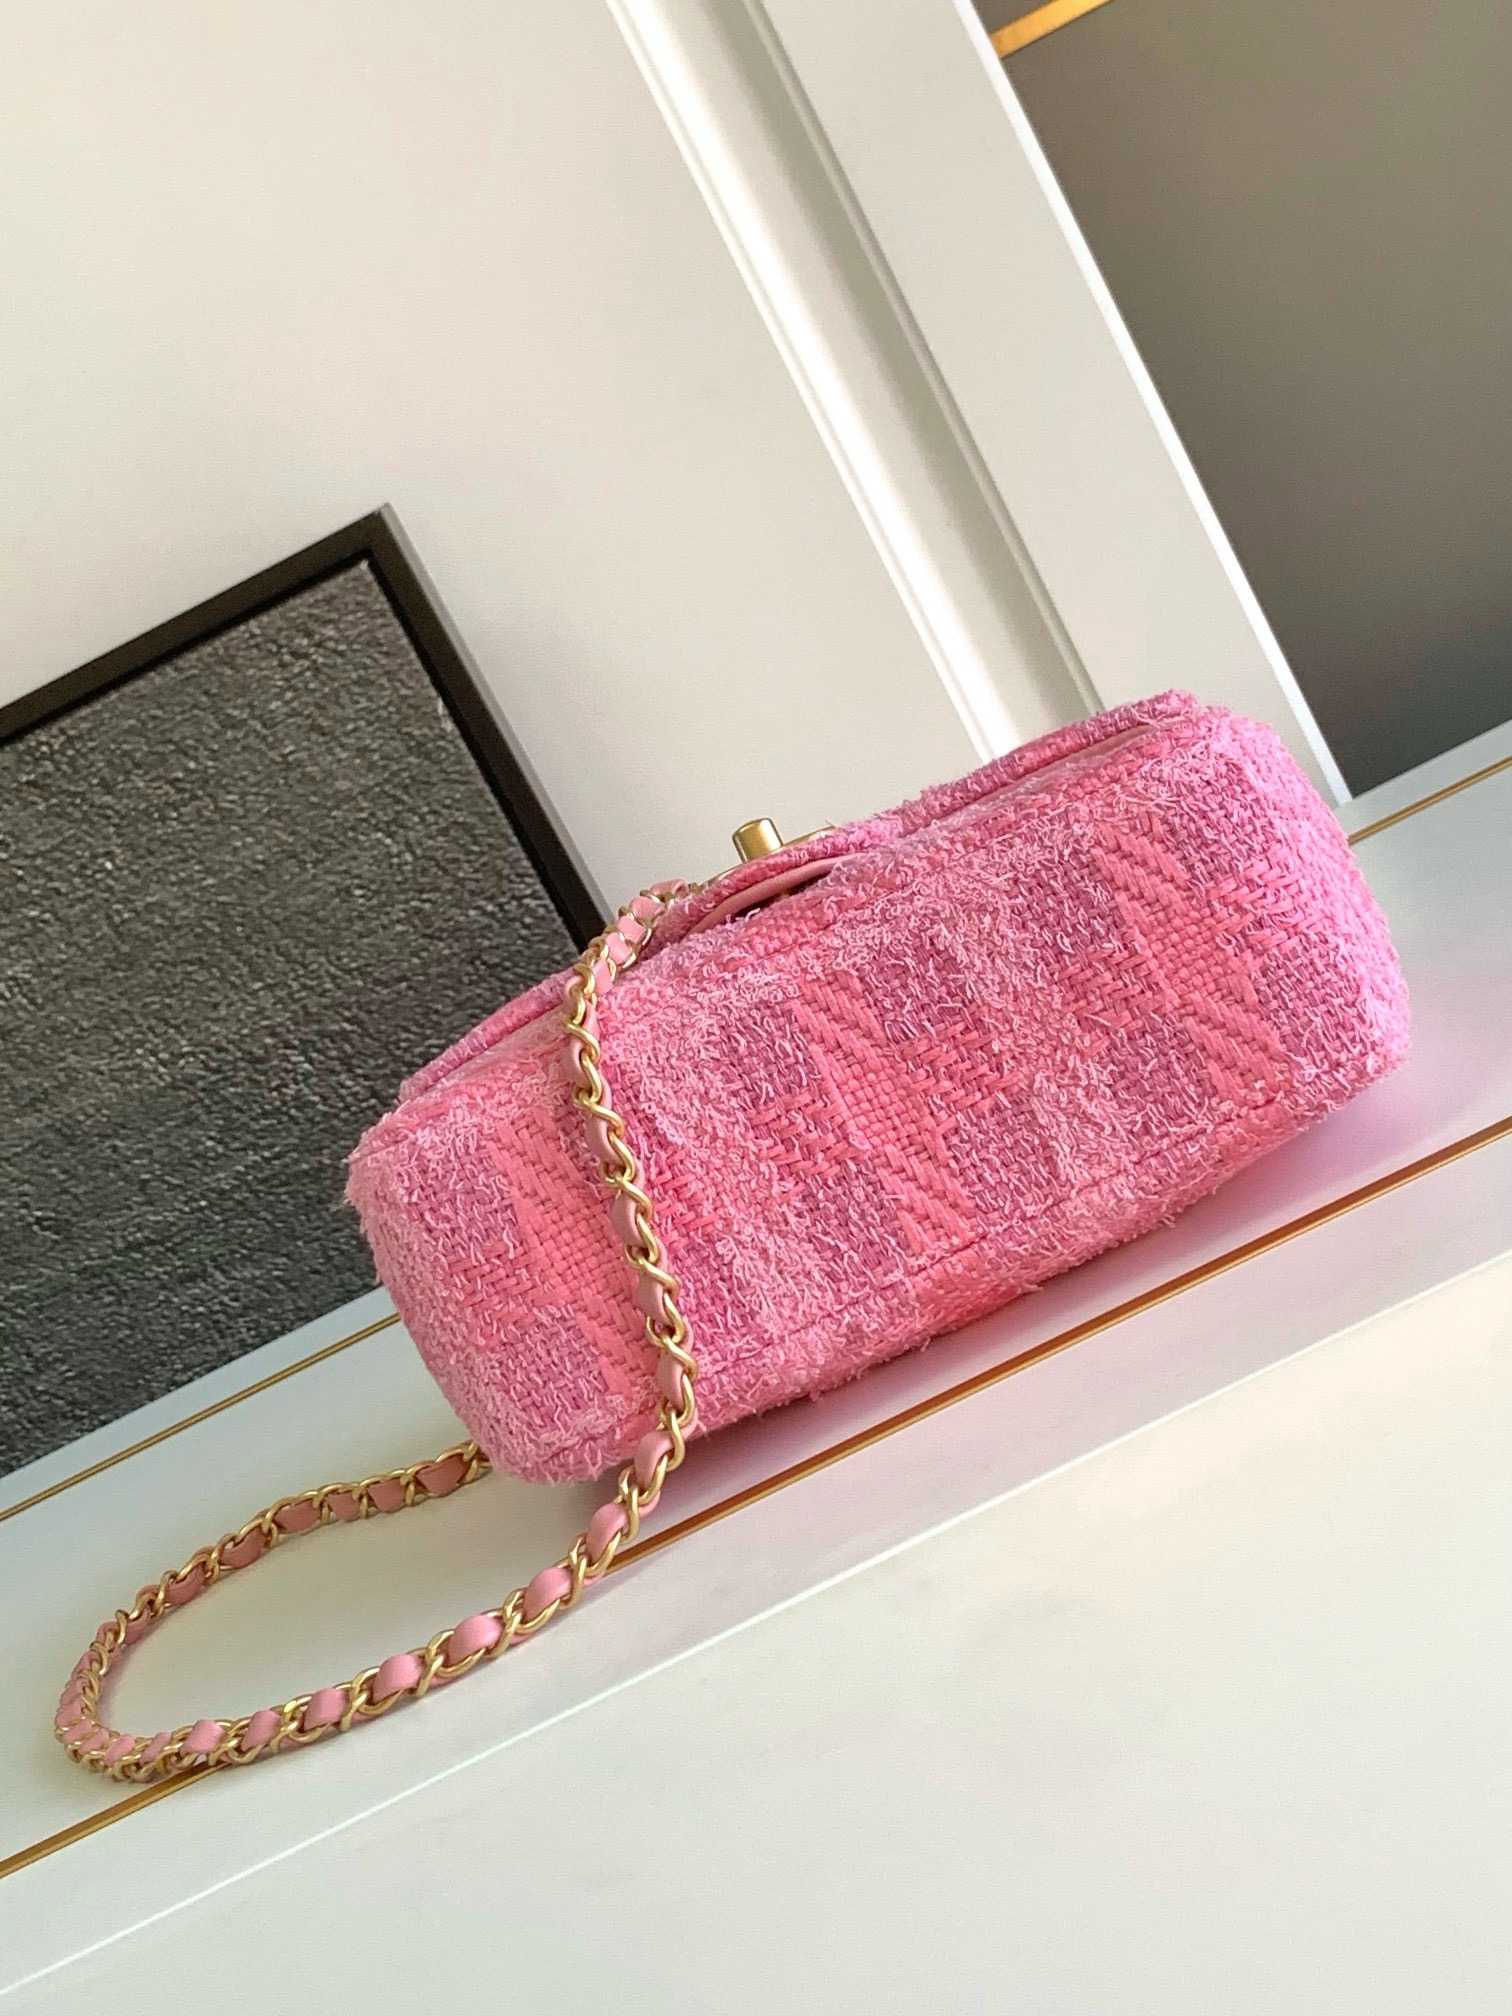 Chanel SMALL FLAP BAG Cotton Tweed AS4384 PINK